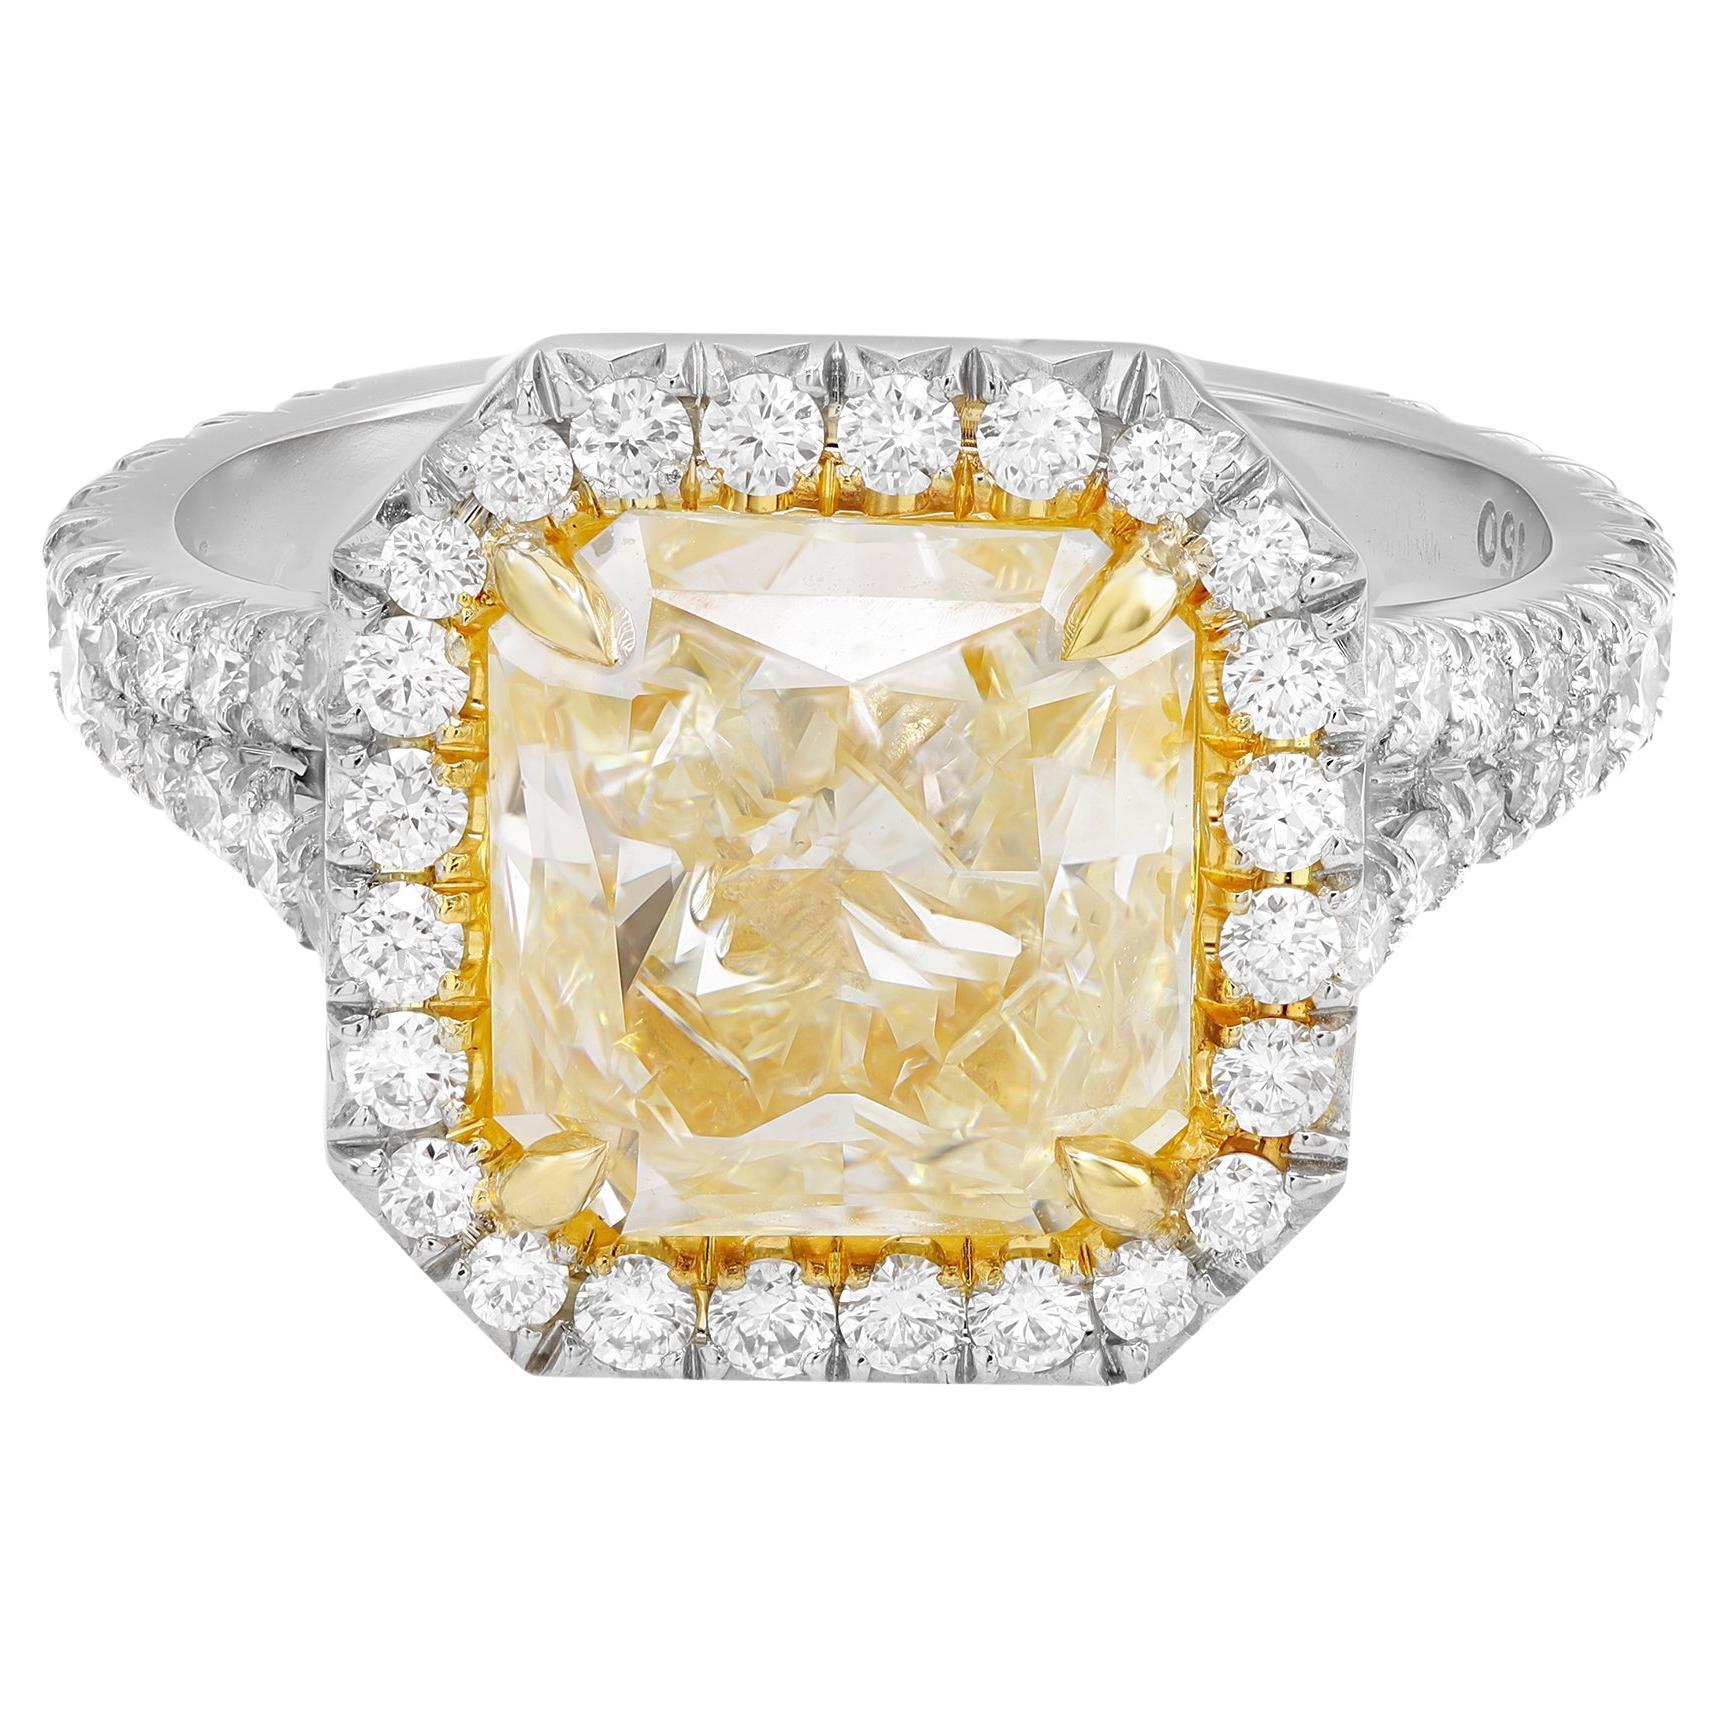 Natural Light Yellow Brilliant Diamond Halo Engagement Ring Platinum 3.03cts GIA For Sale